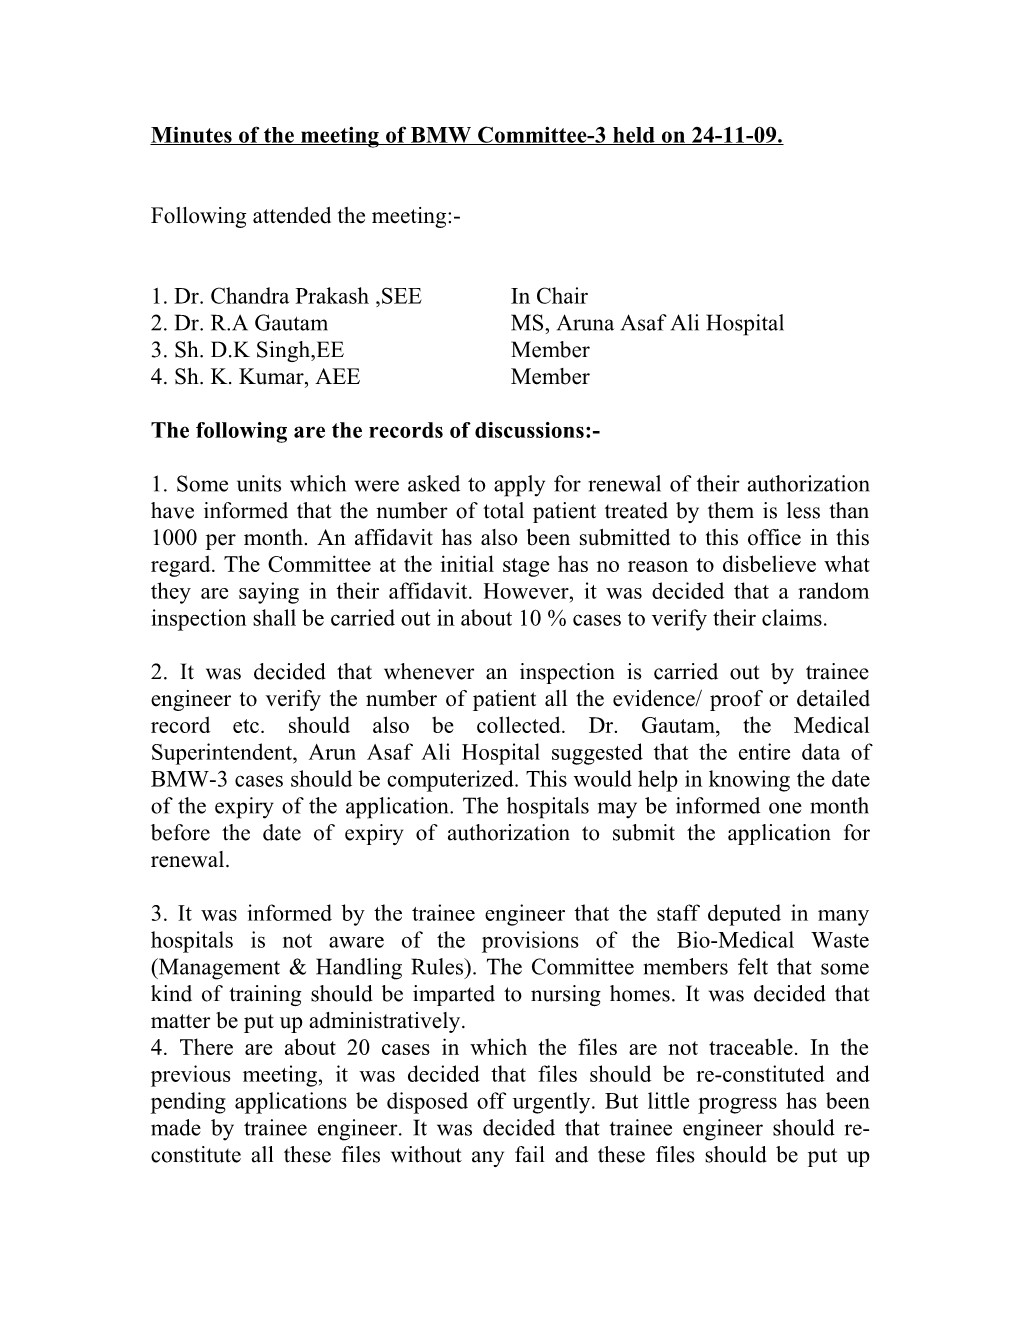 Minutes of the Meeting of BMW Committee-3 Held on 24-11-09